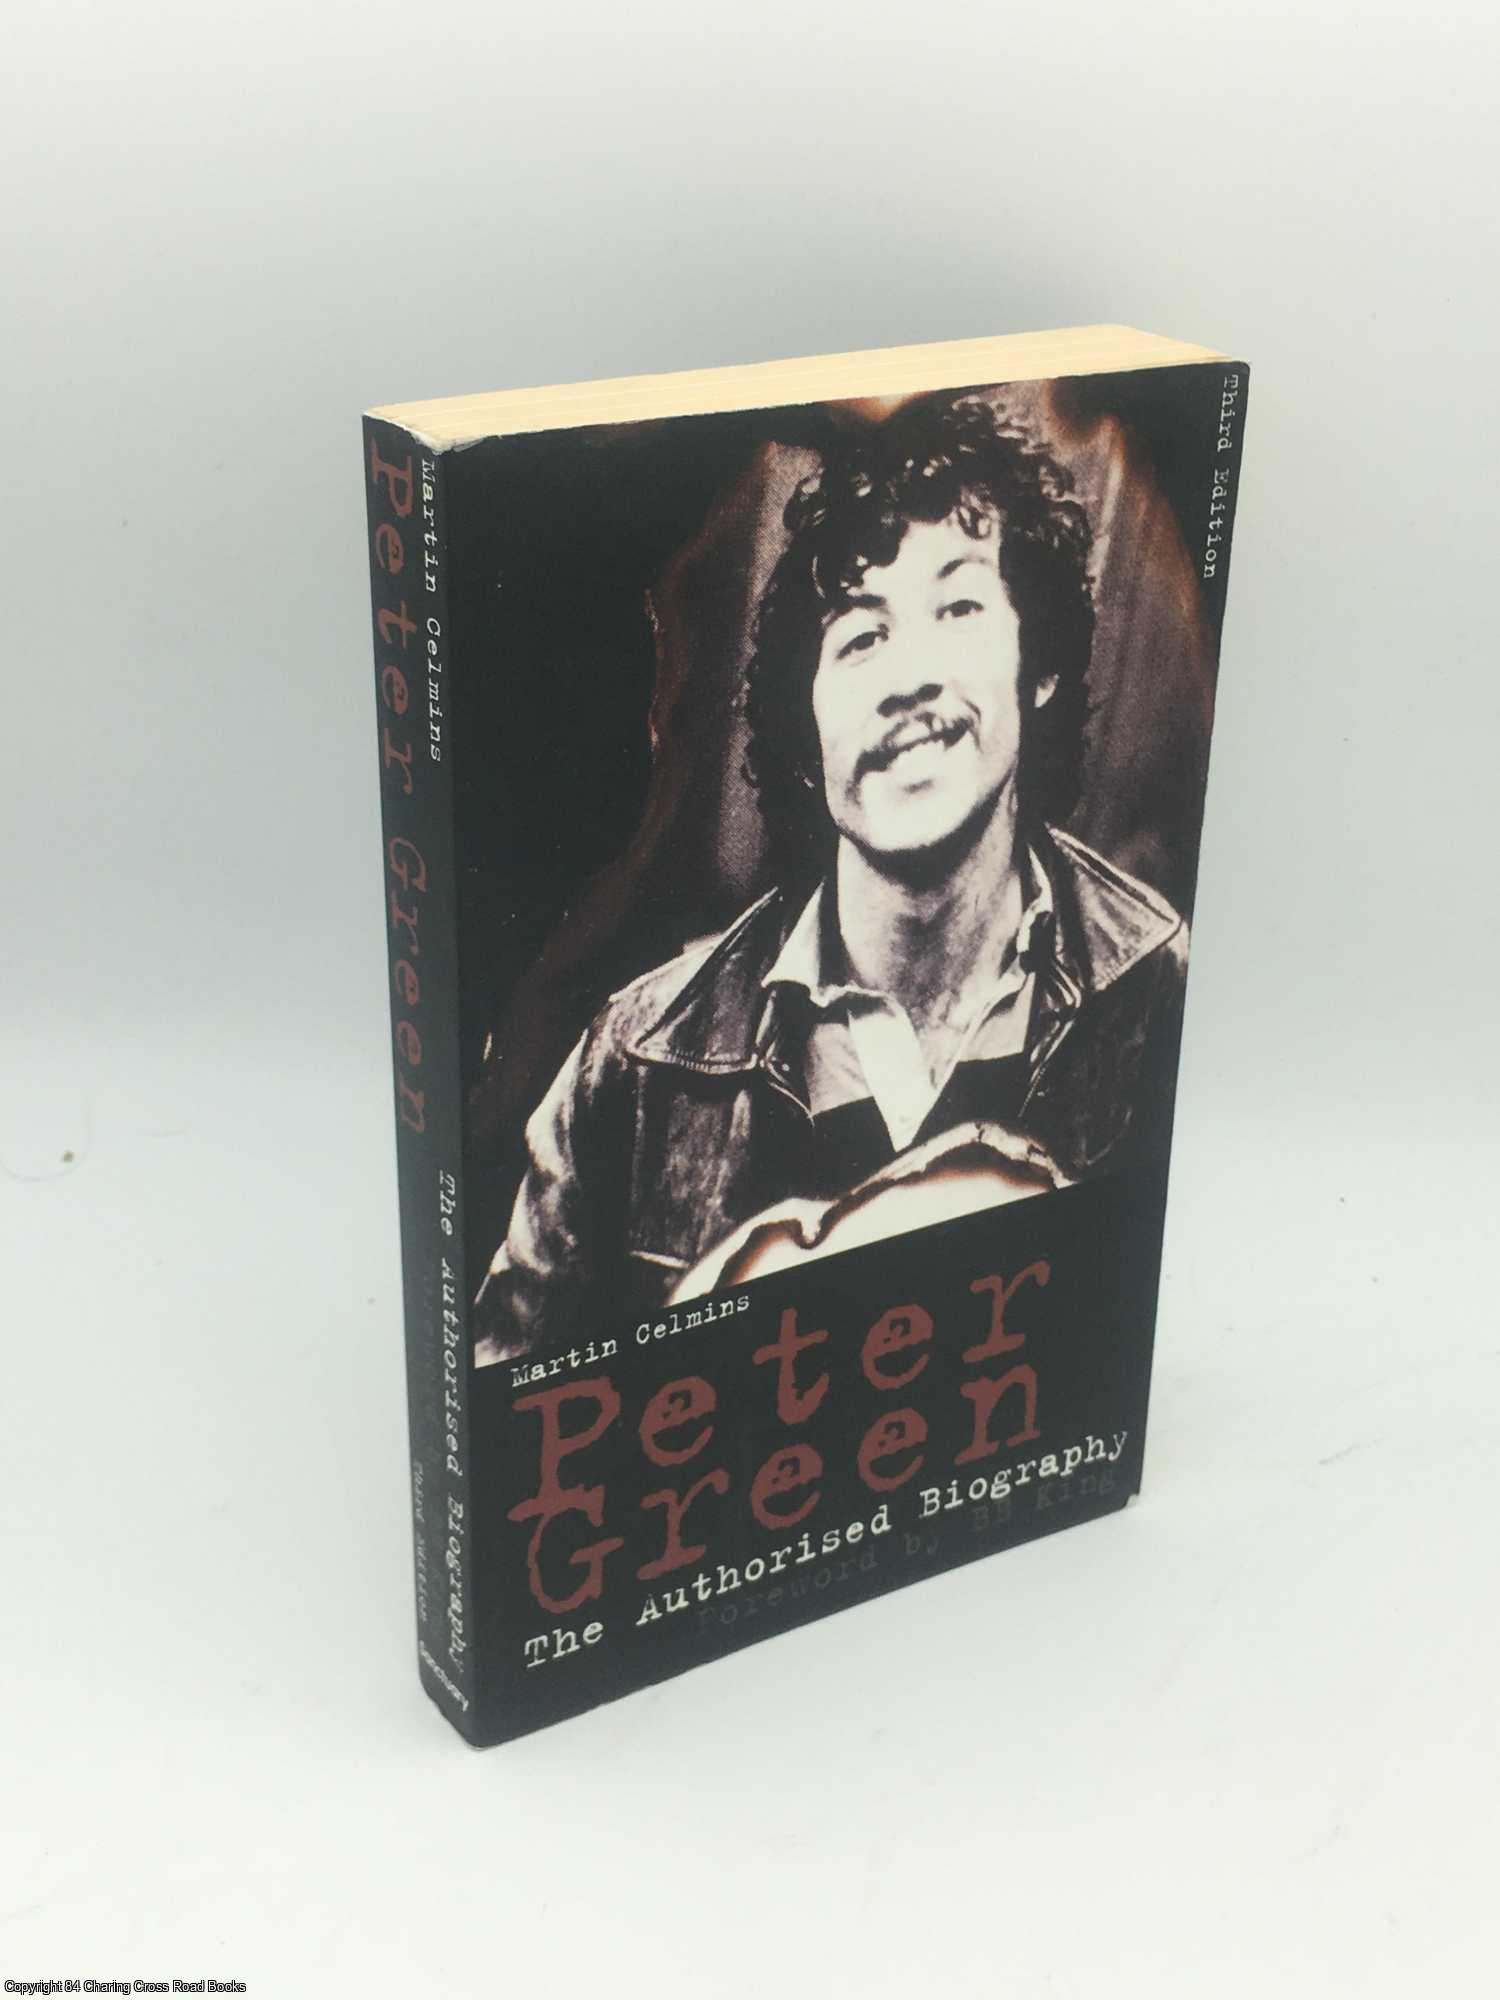 Celmins, Martin - Peter Green: The Authorized Biography